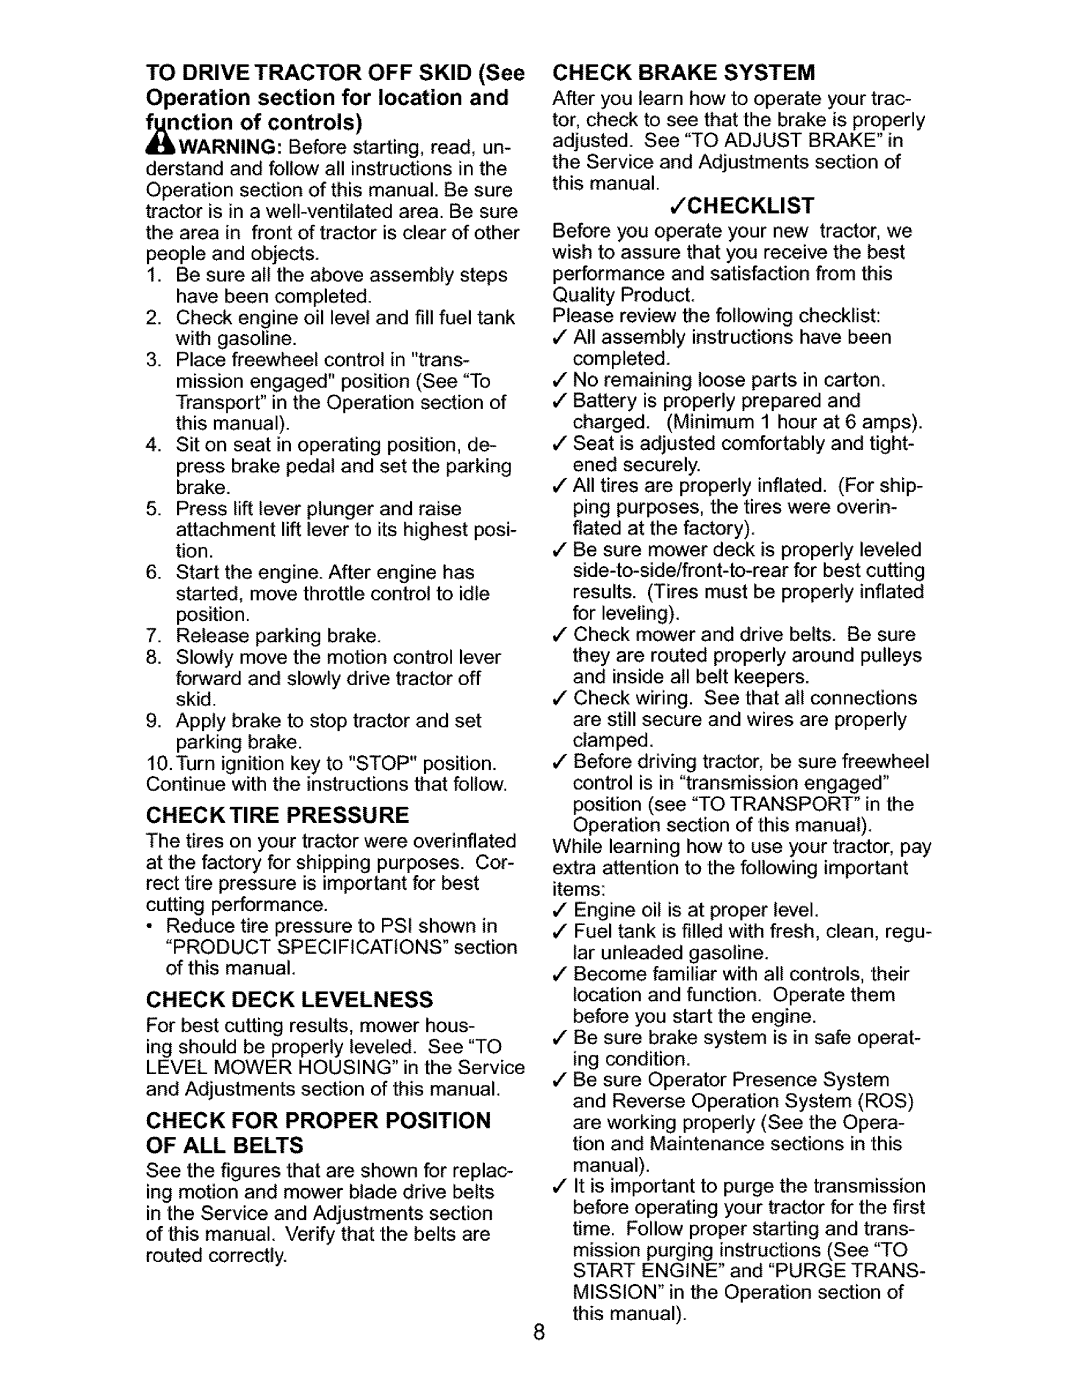 Craftsman 917.27632 owner manual knction of controls, #Checklist 